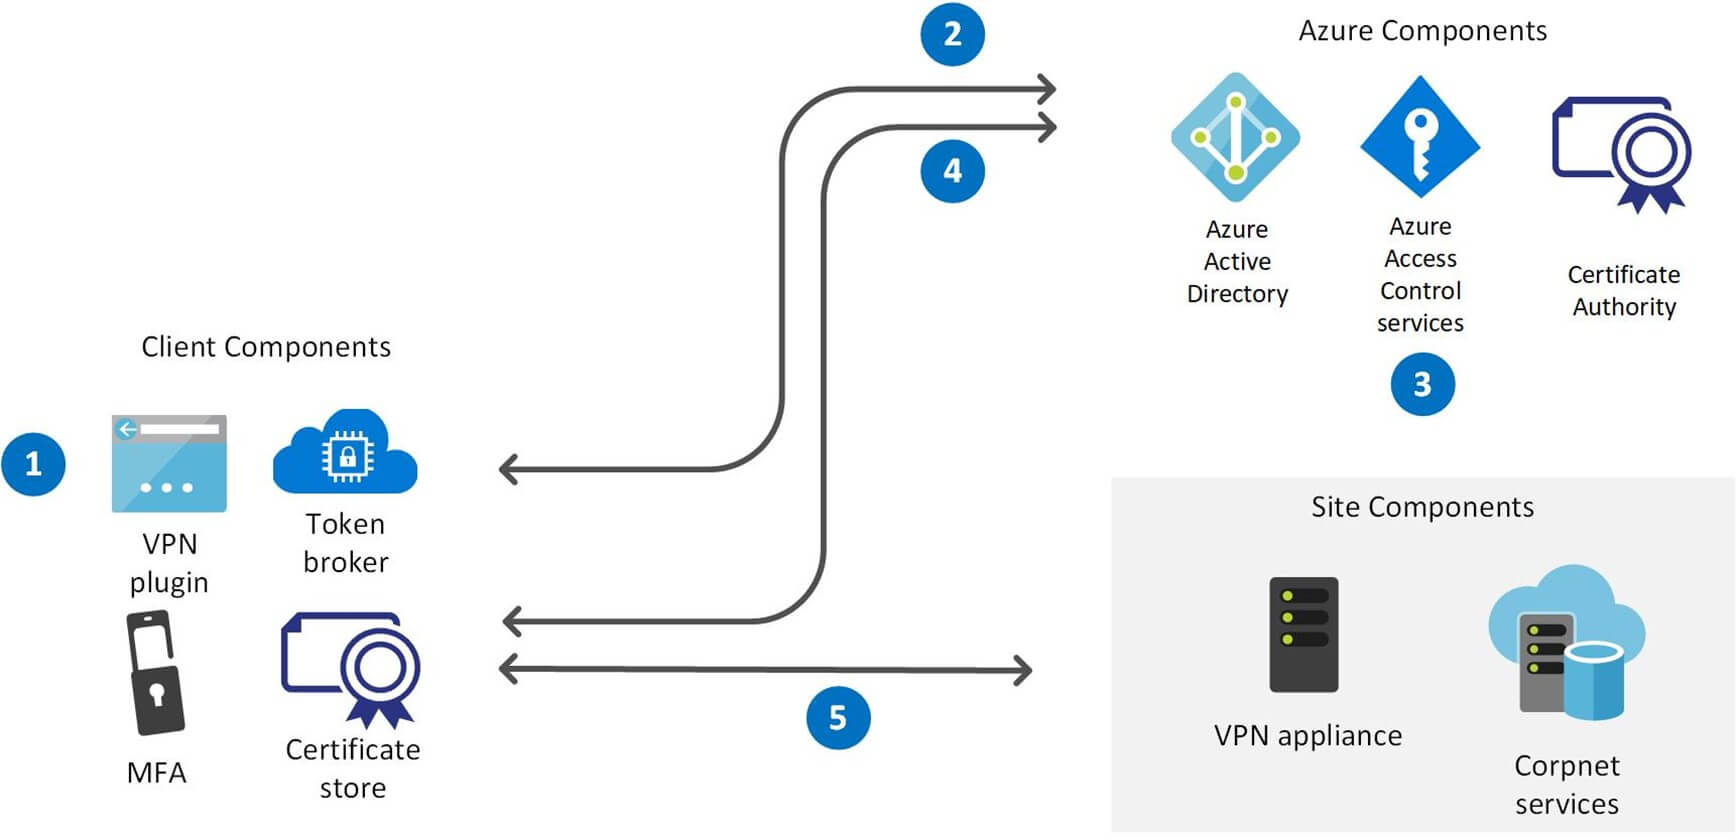 A graphic representation of the client connection workflow. Sections shown are client components, Azure components, and site components.